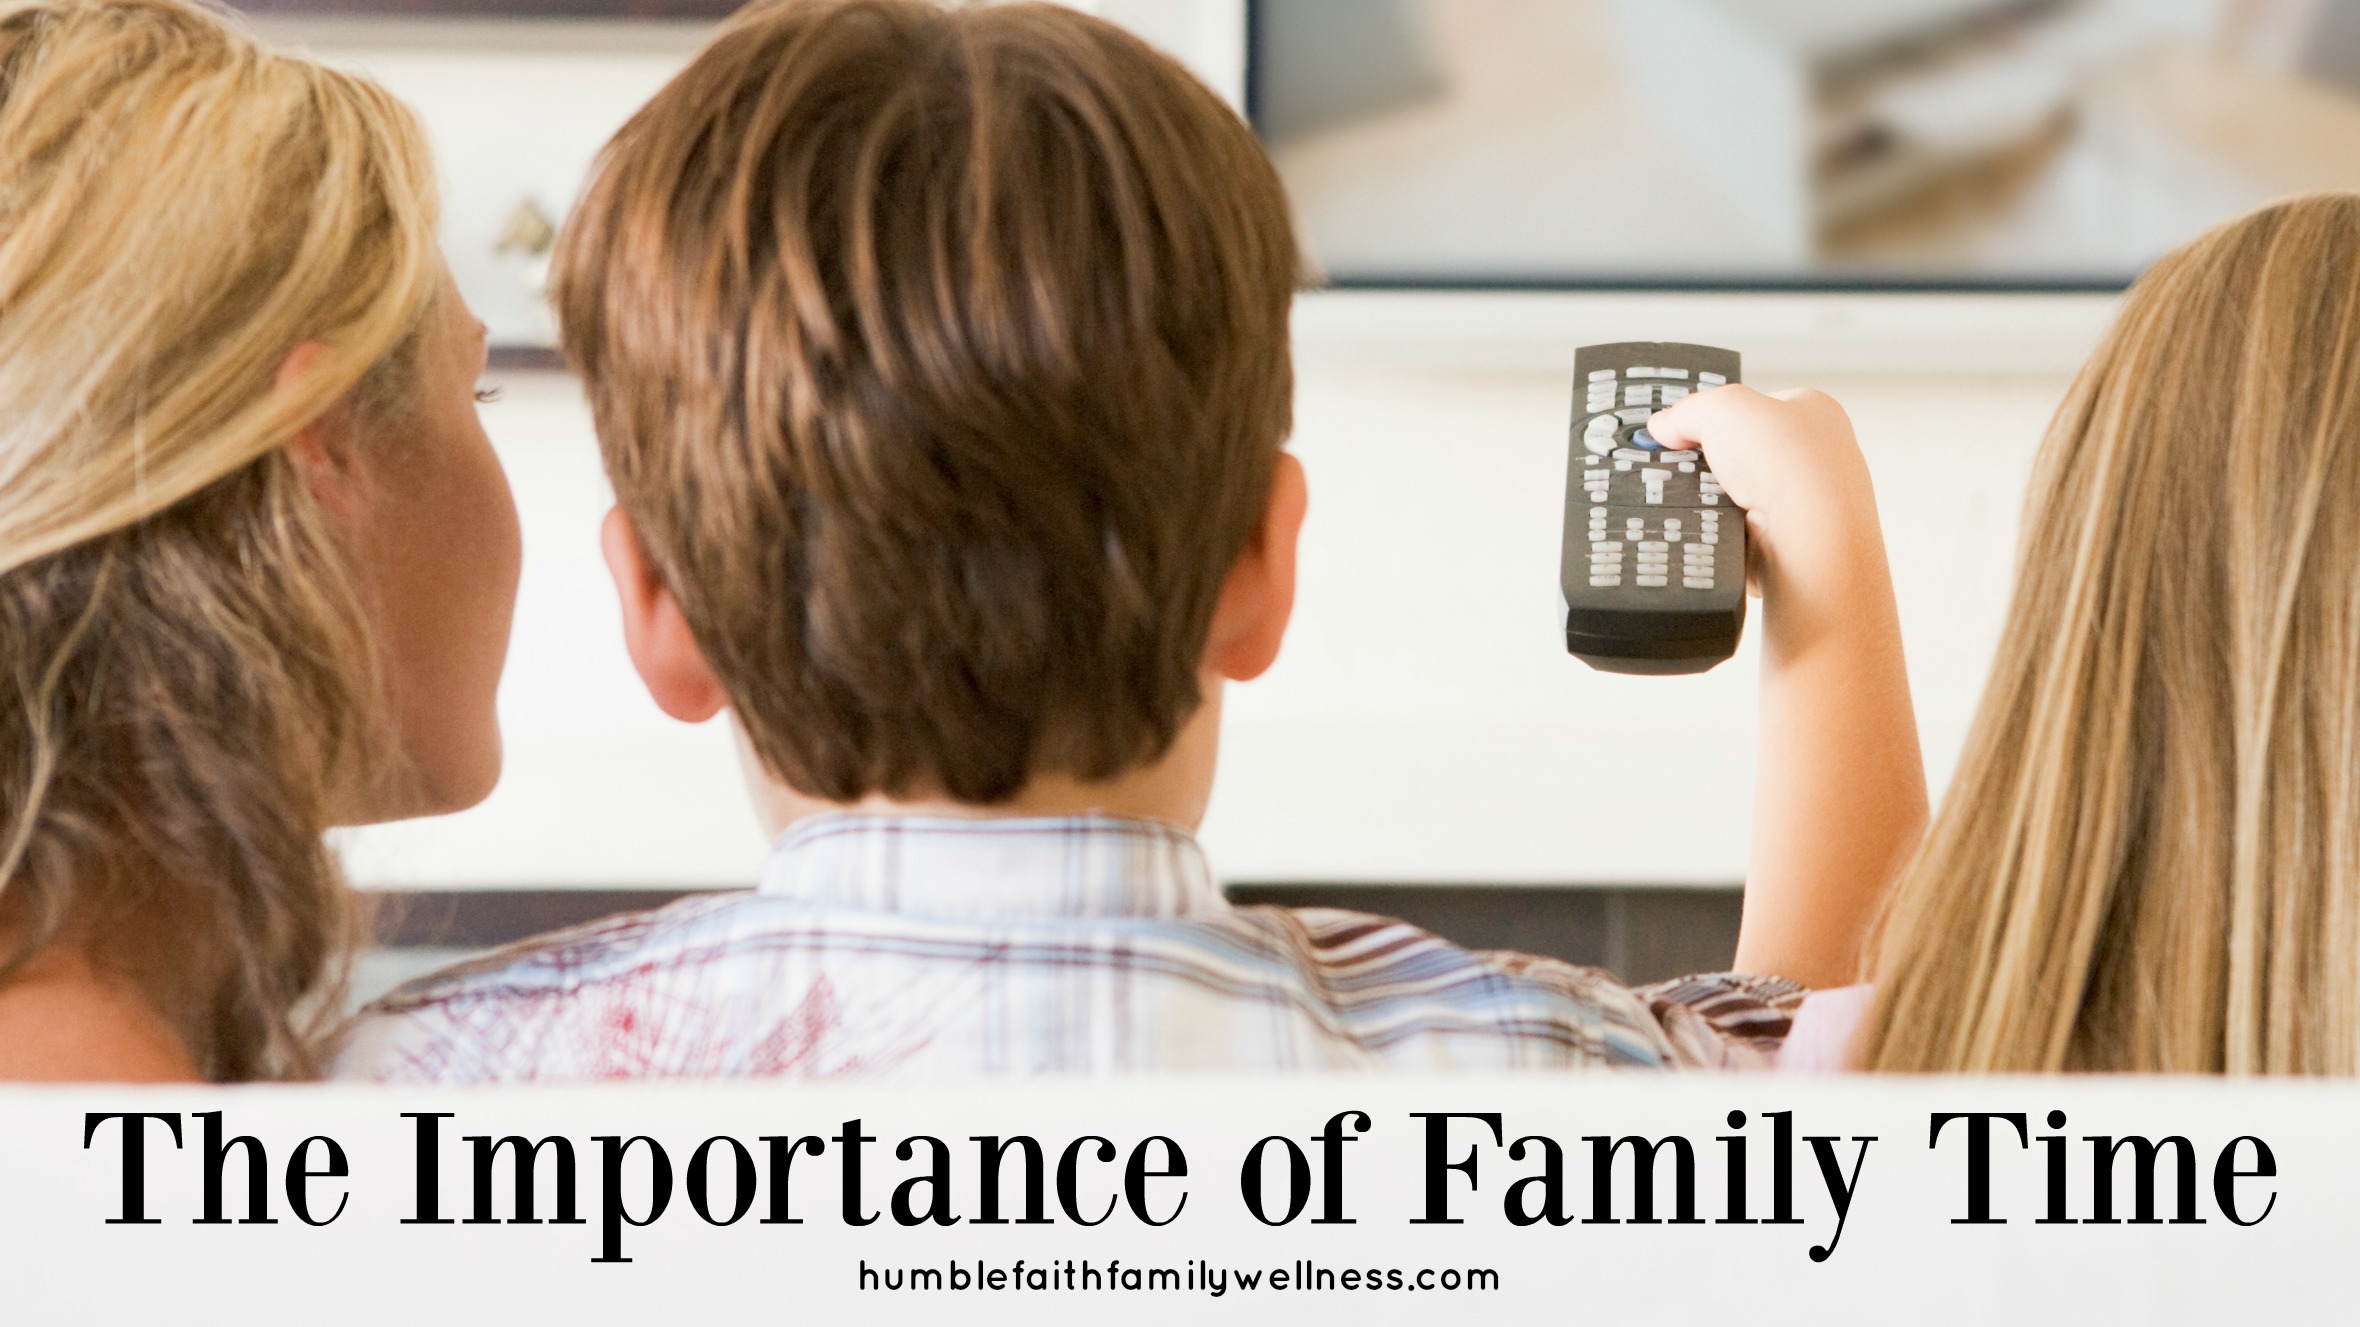 The importance of Family Time